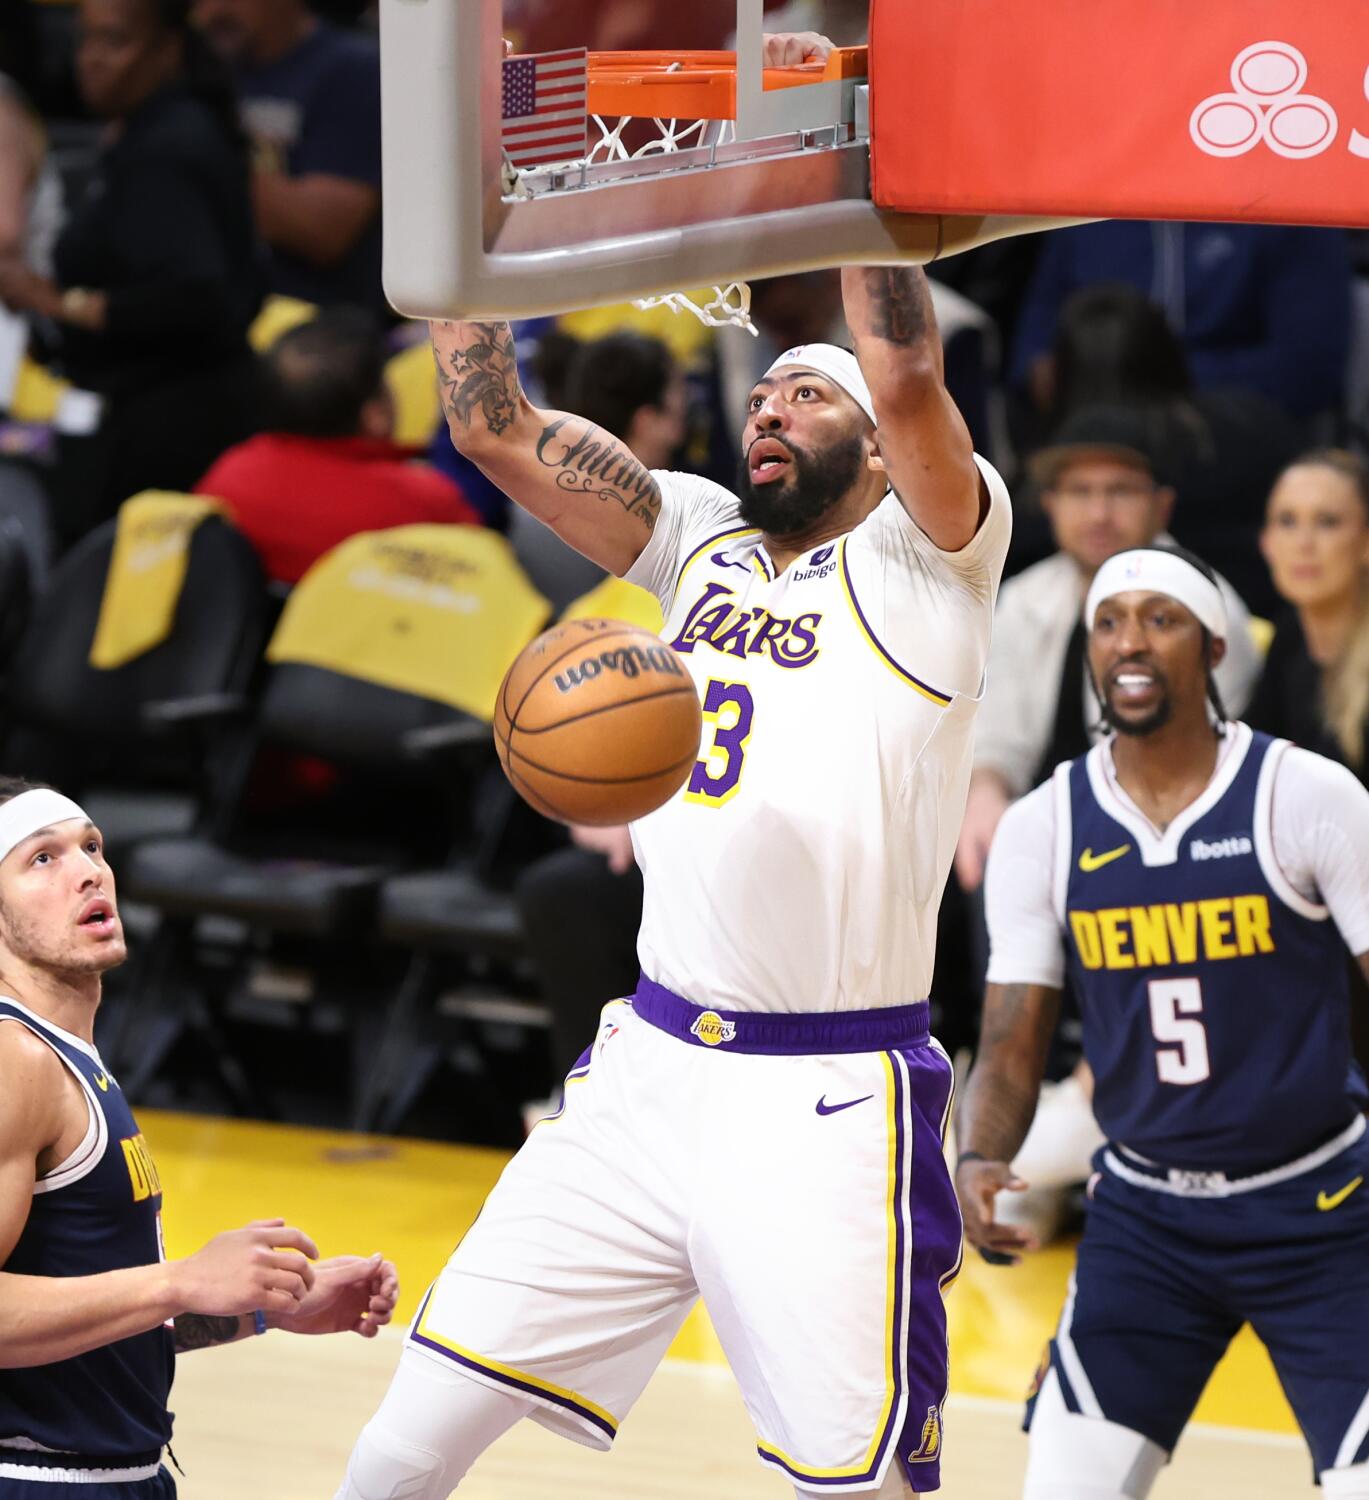 Game 4 takeaways: Lakers finally met Nuggets' force with force